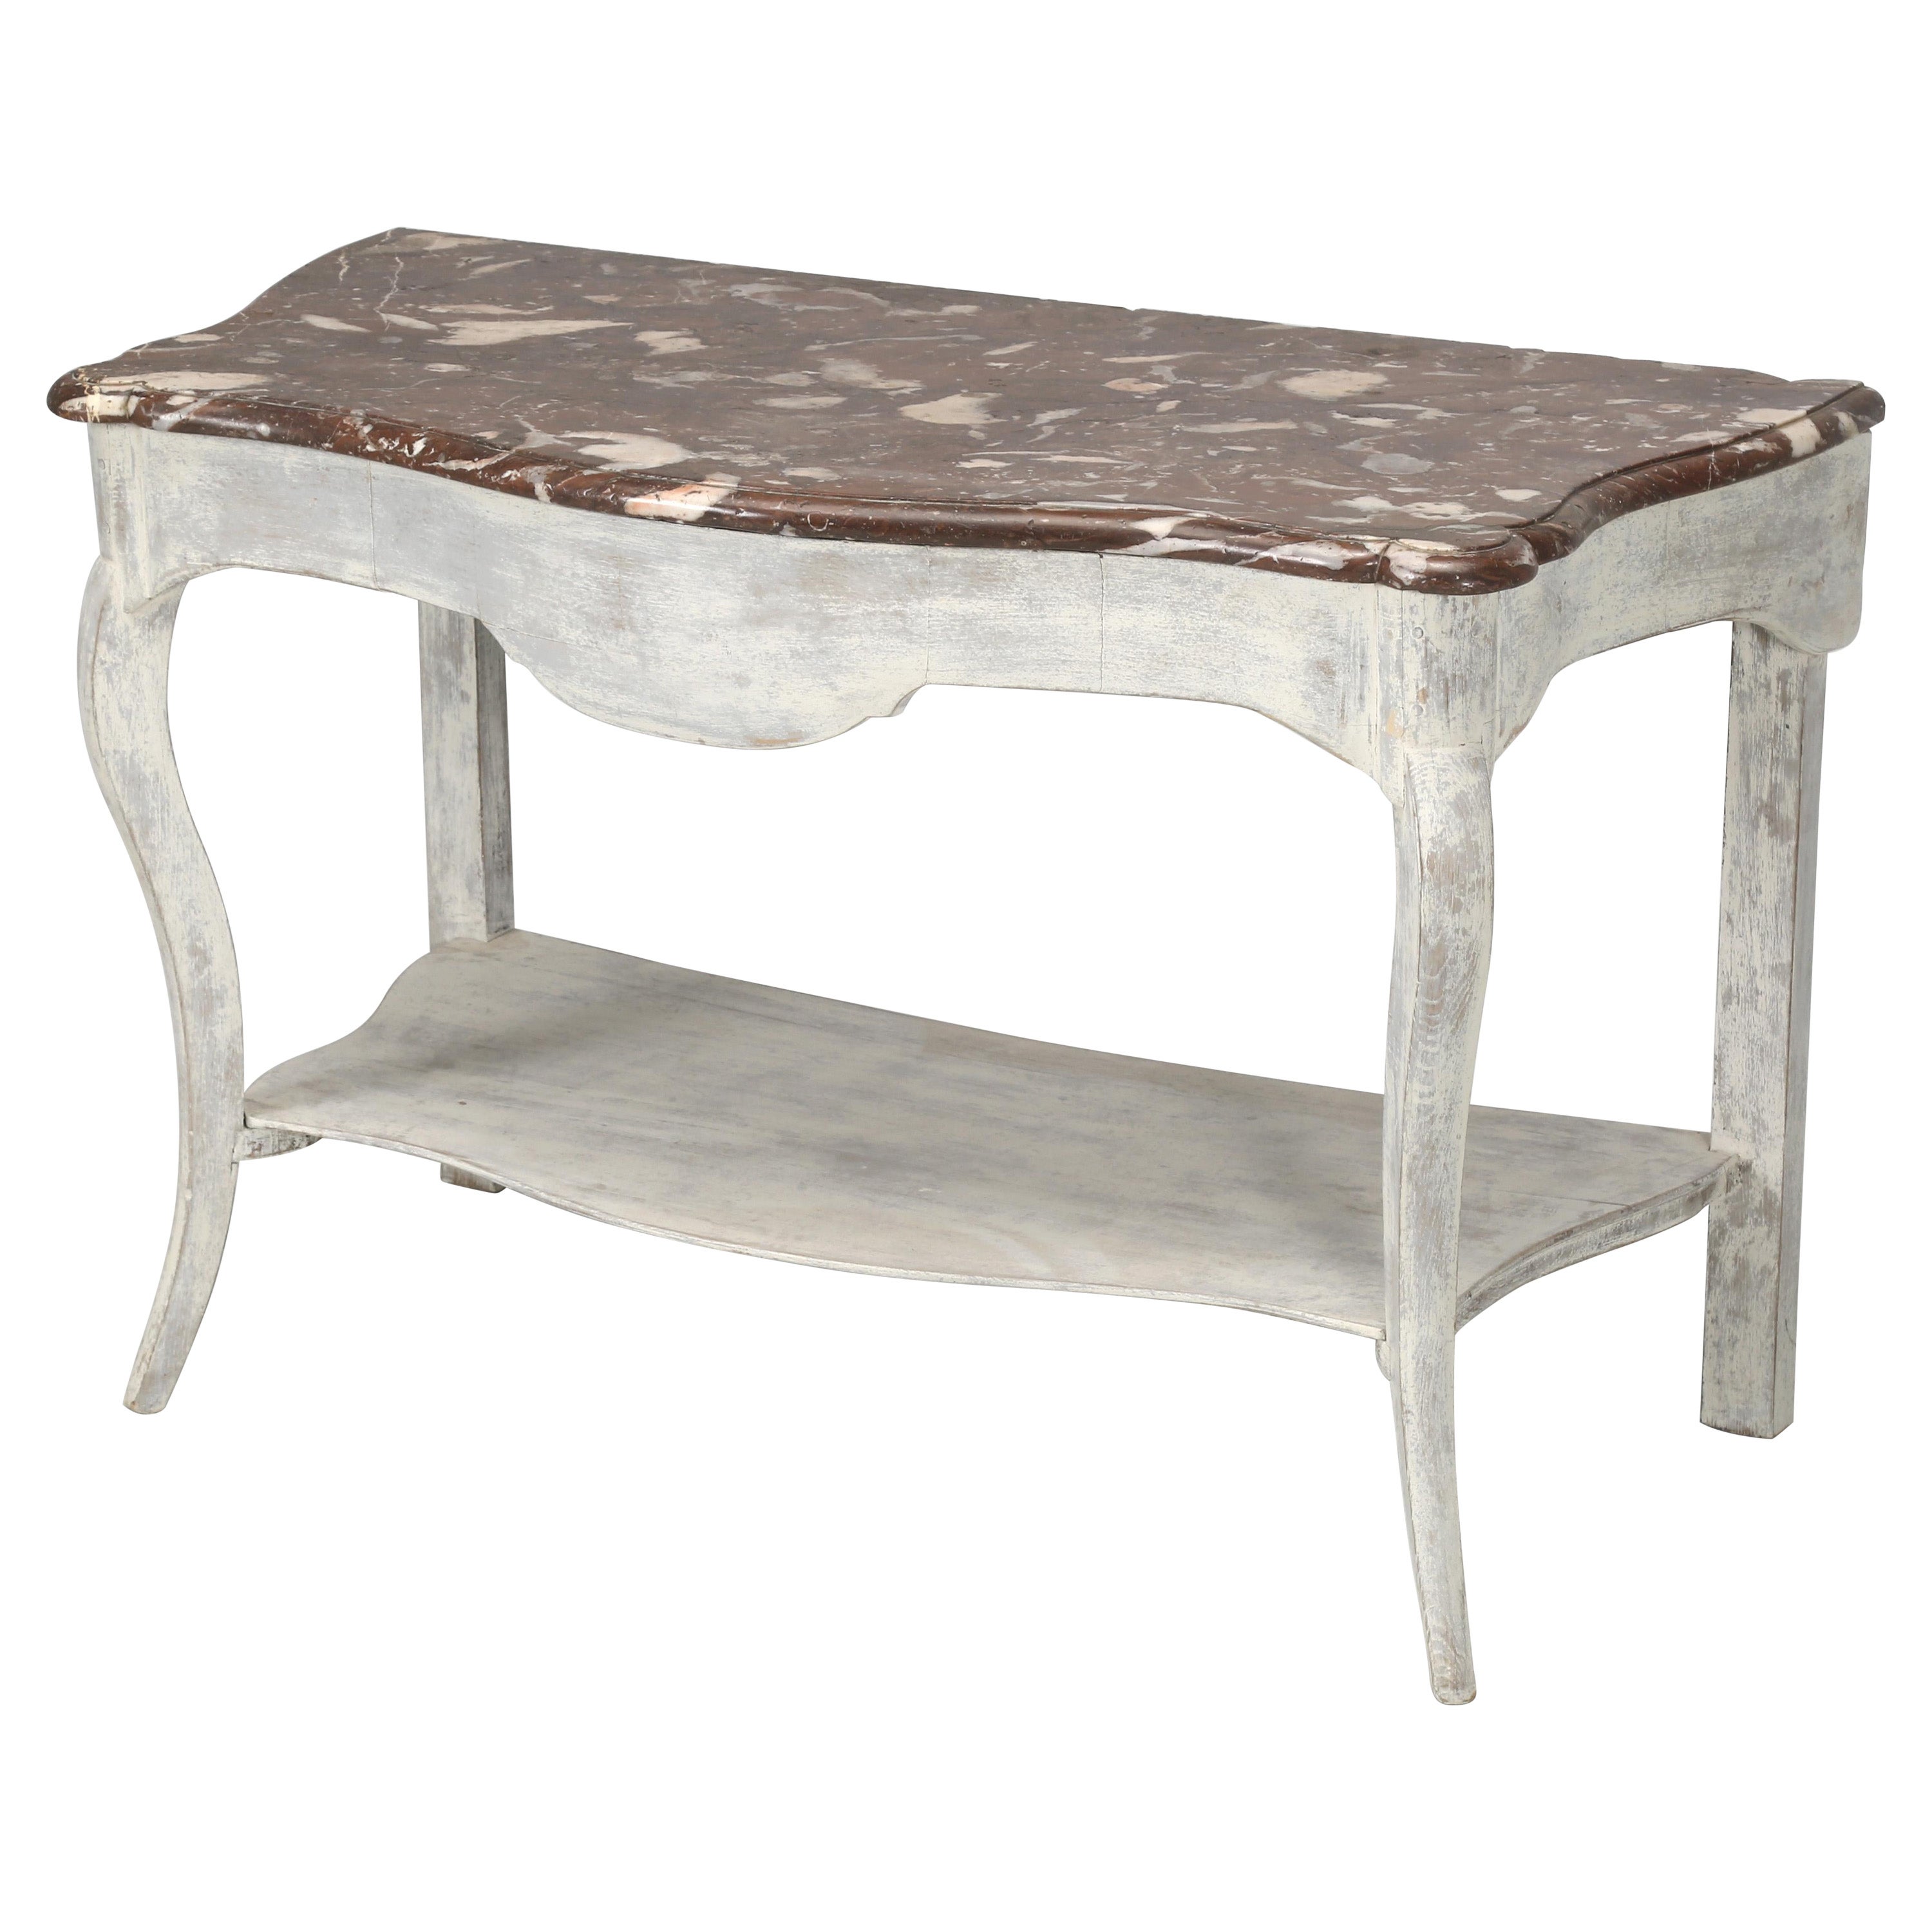 Antique Painted Console Table with a Stunning Marble Top Possibly Swedish